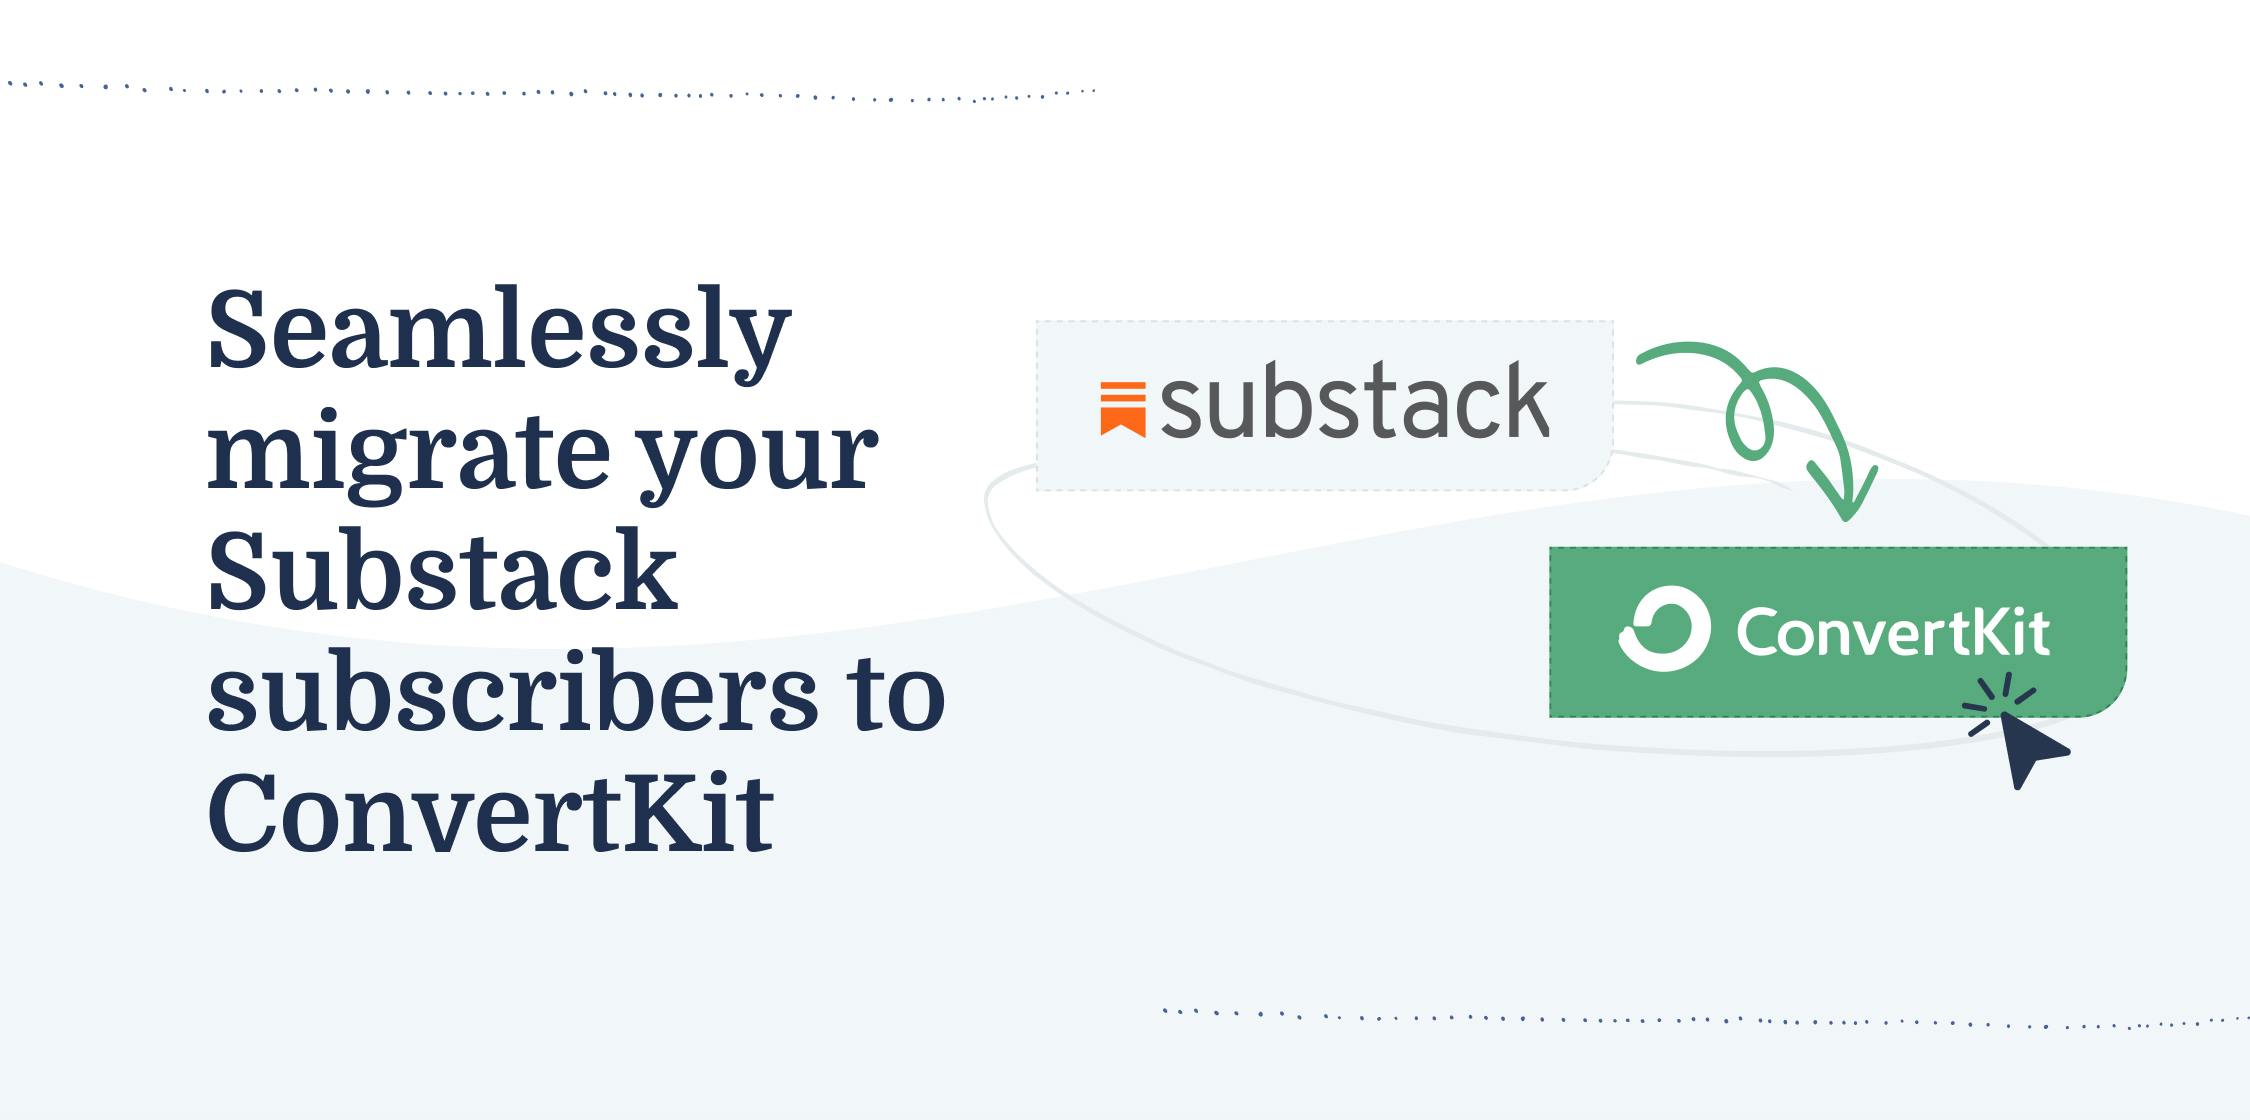 Migrate your Substack subscribers to ConvertKit